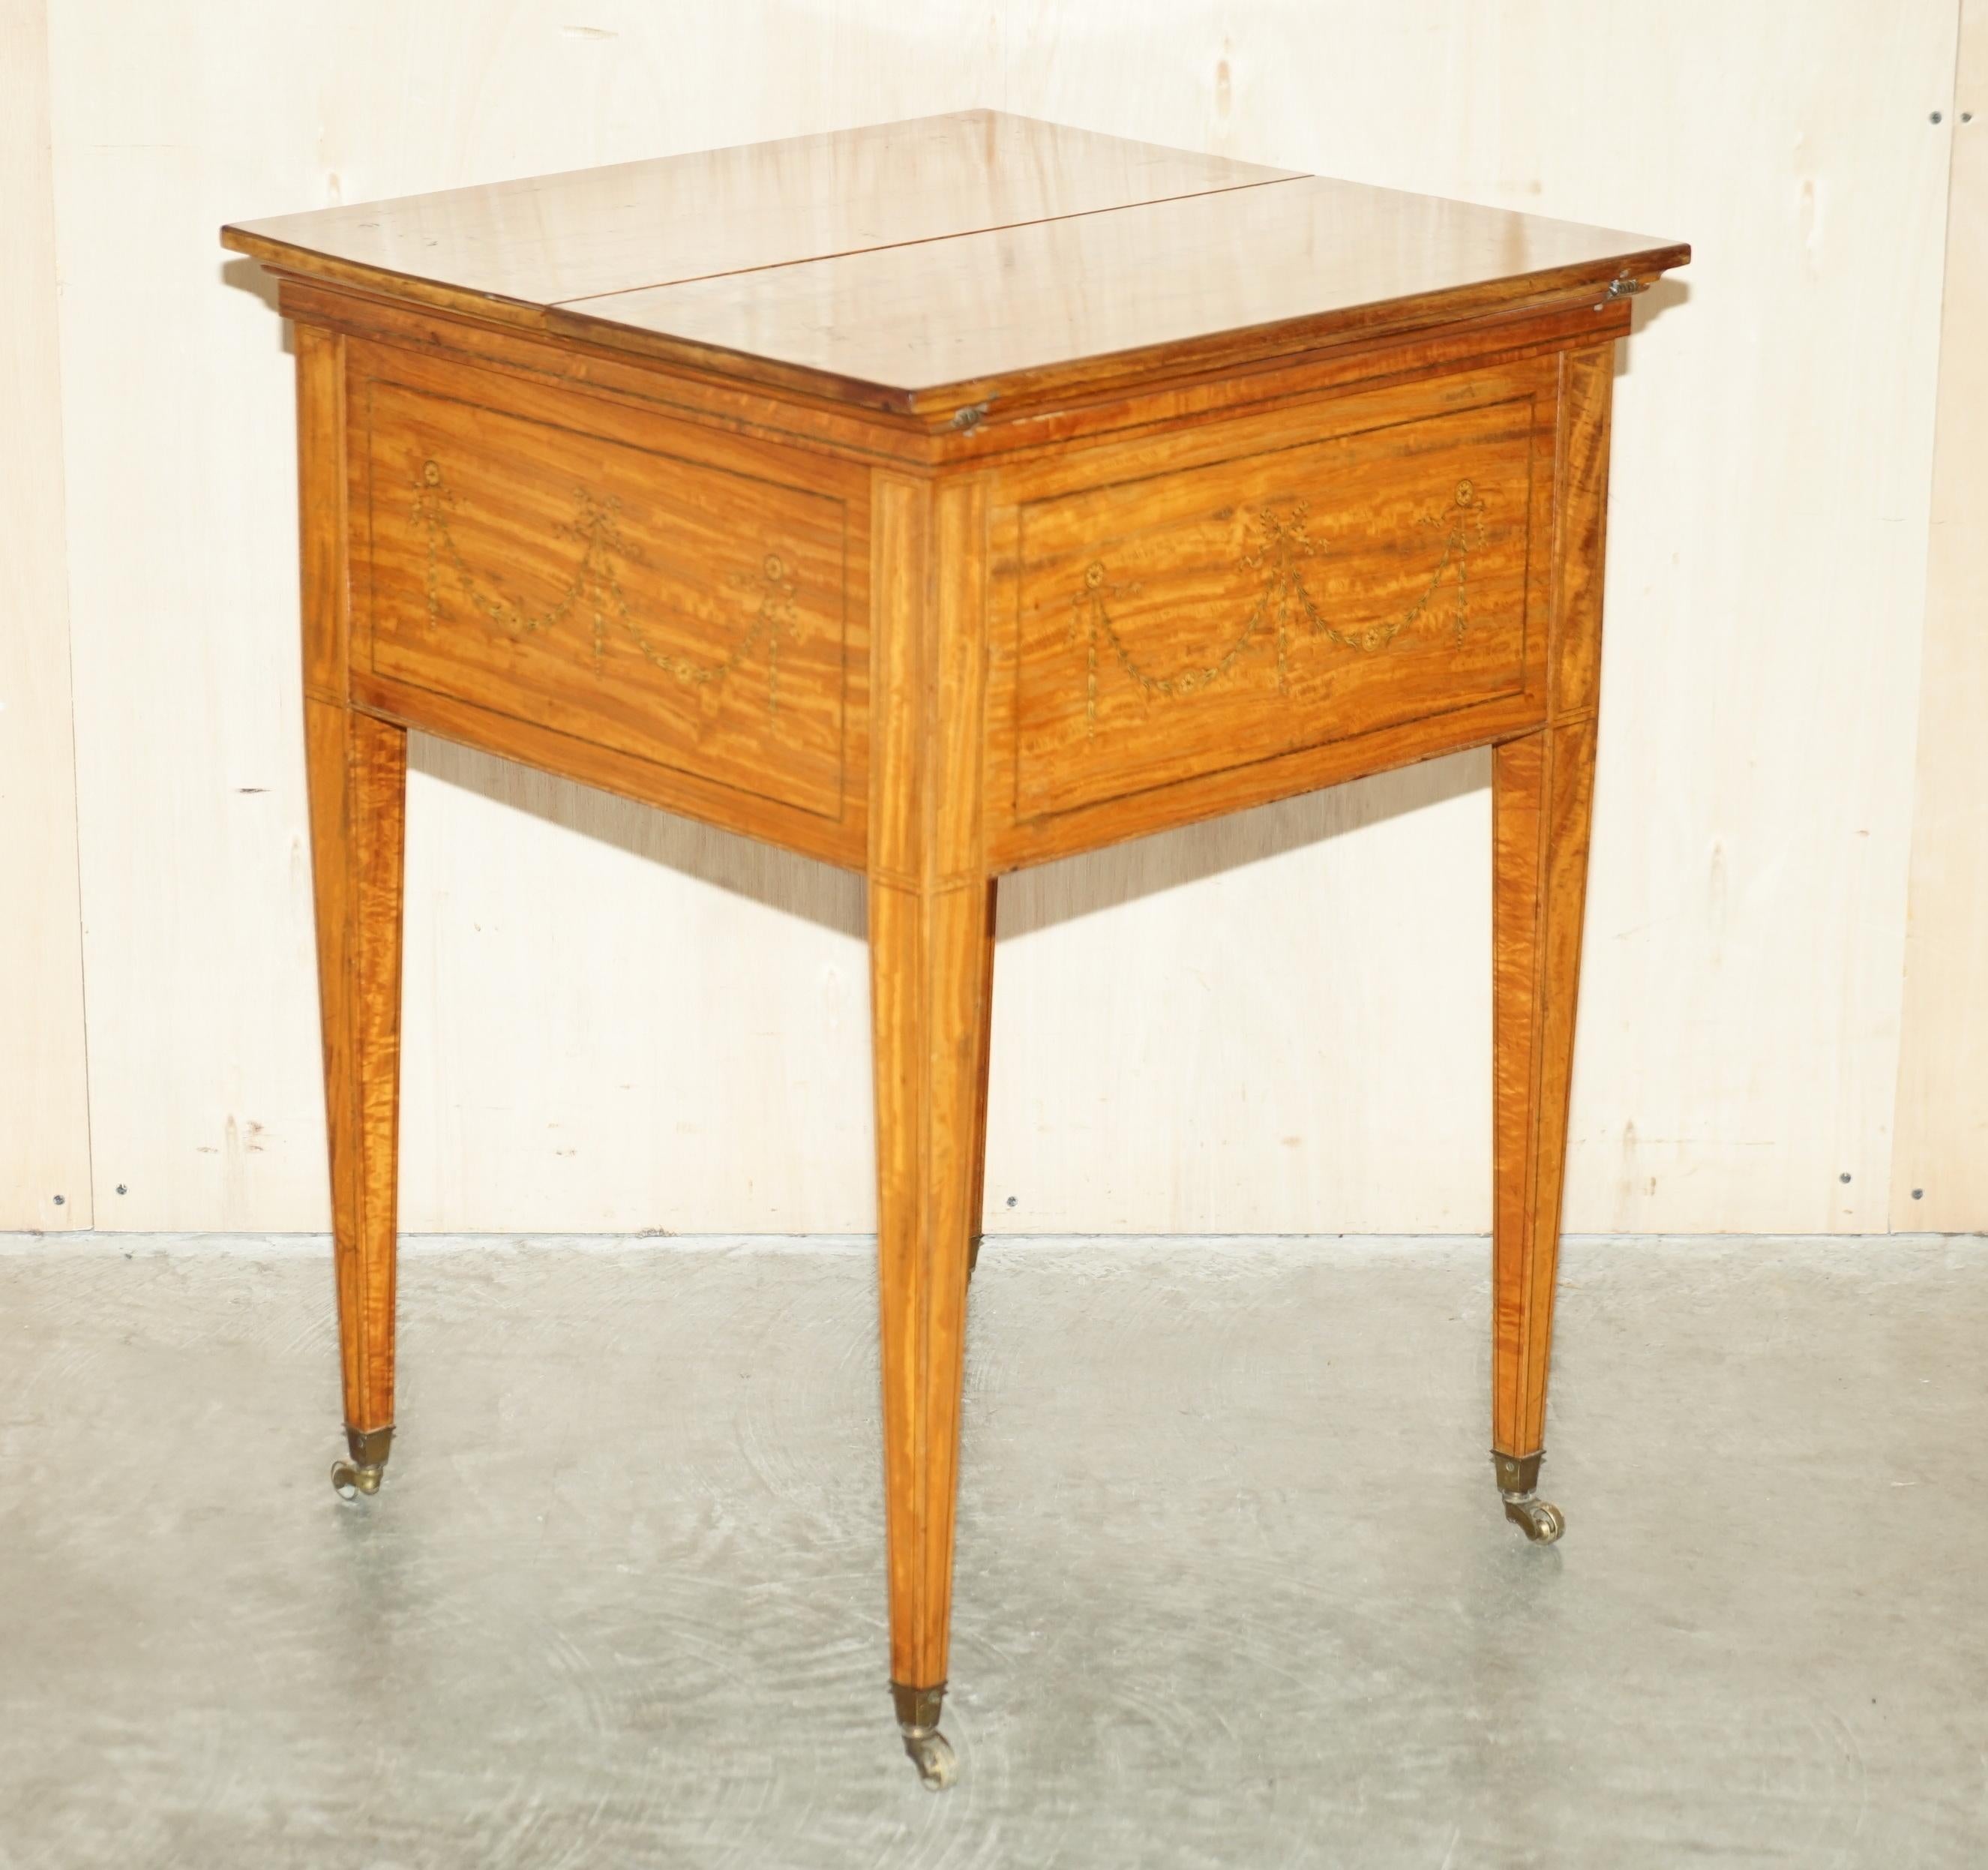 We are delighted to offer for sale this wonderful Victorian circa 1860-1880 Sheraton Revival Satinwood Elevette drinks table made and stamped by Maple & Co London

What a table! This really makes serving drinks a sense of occasion when it comes